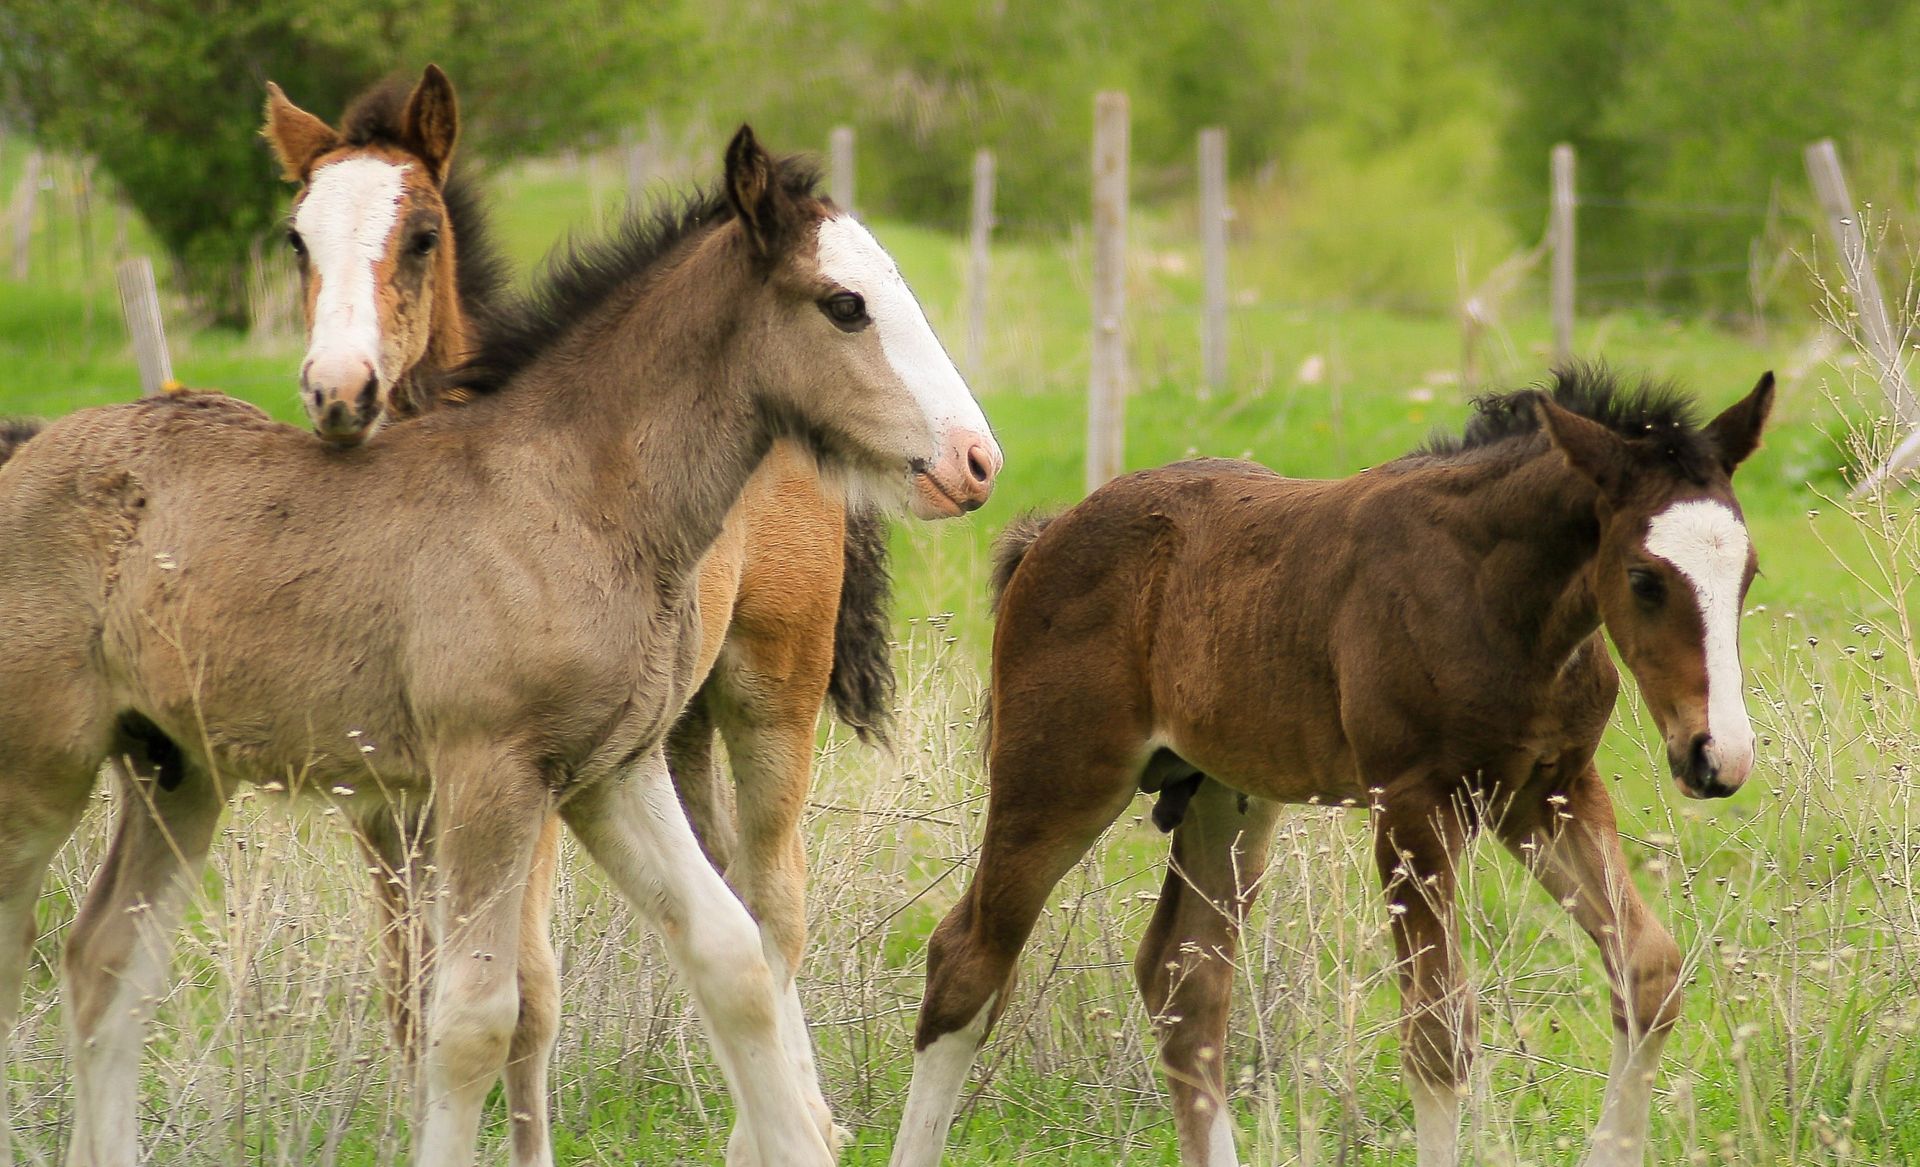 Three young foals in a field.